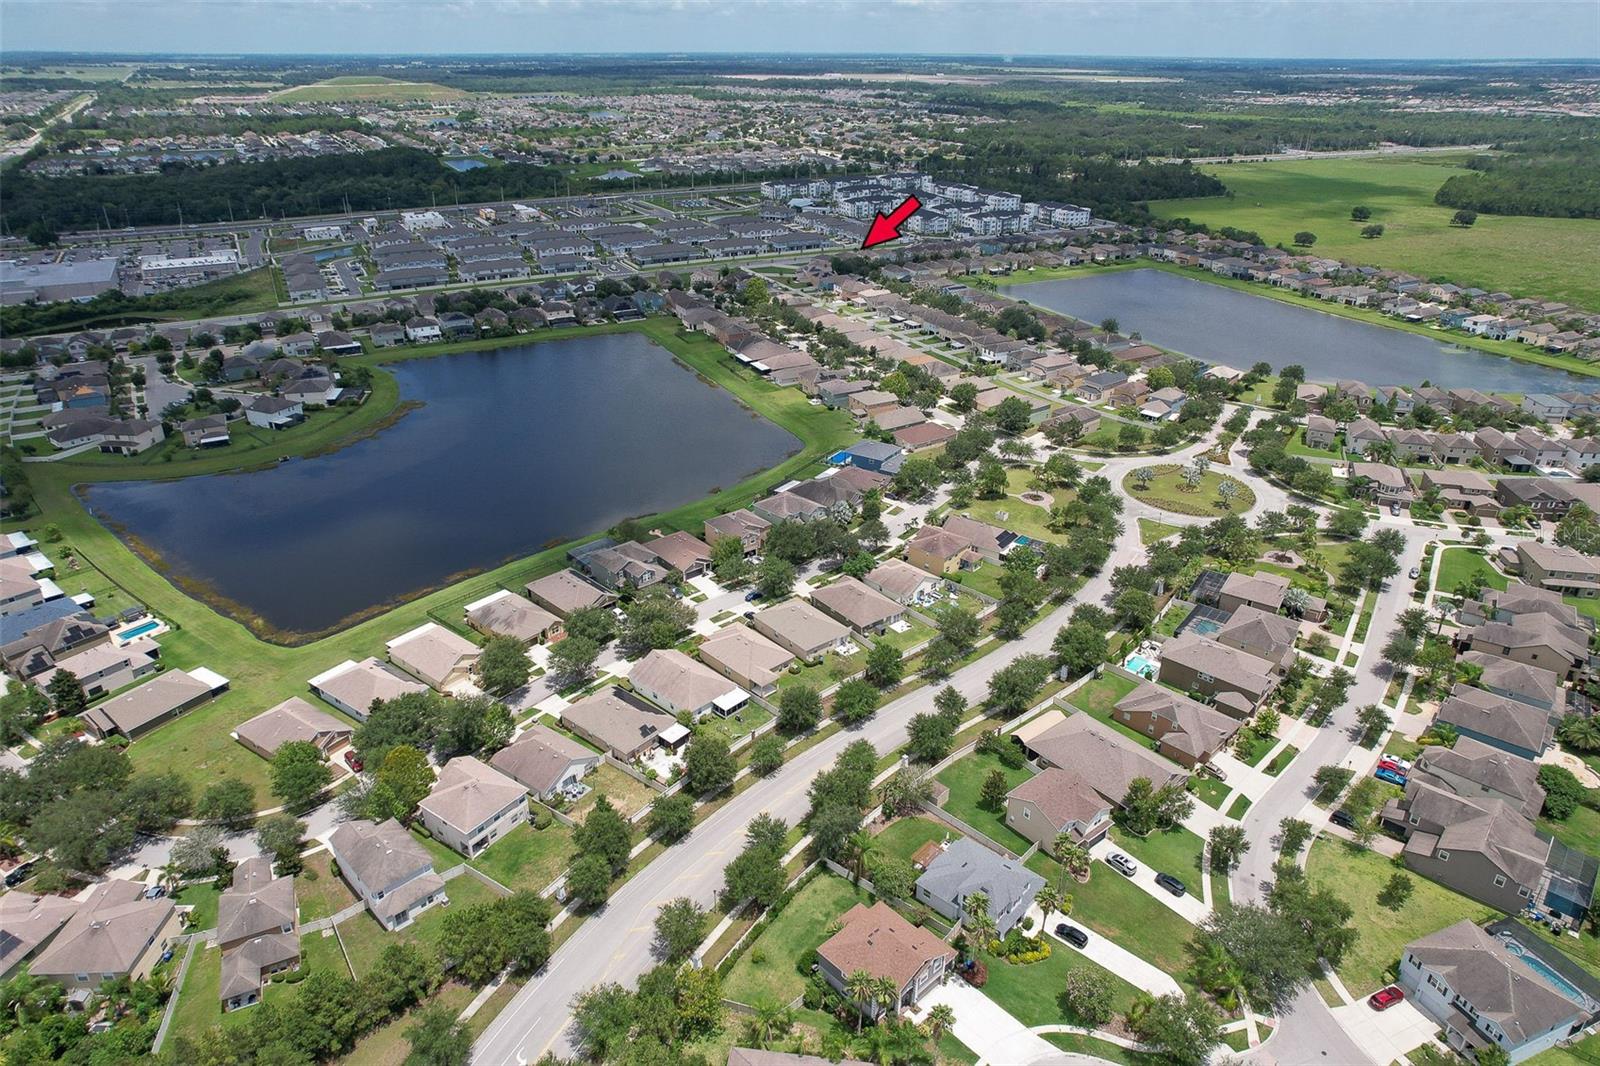 Belmont community boasts multiple amenities: a community complex, walking trails with fitness stations, park areas, playgrounds and ponds throughout.